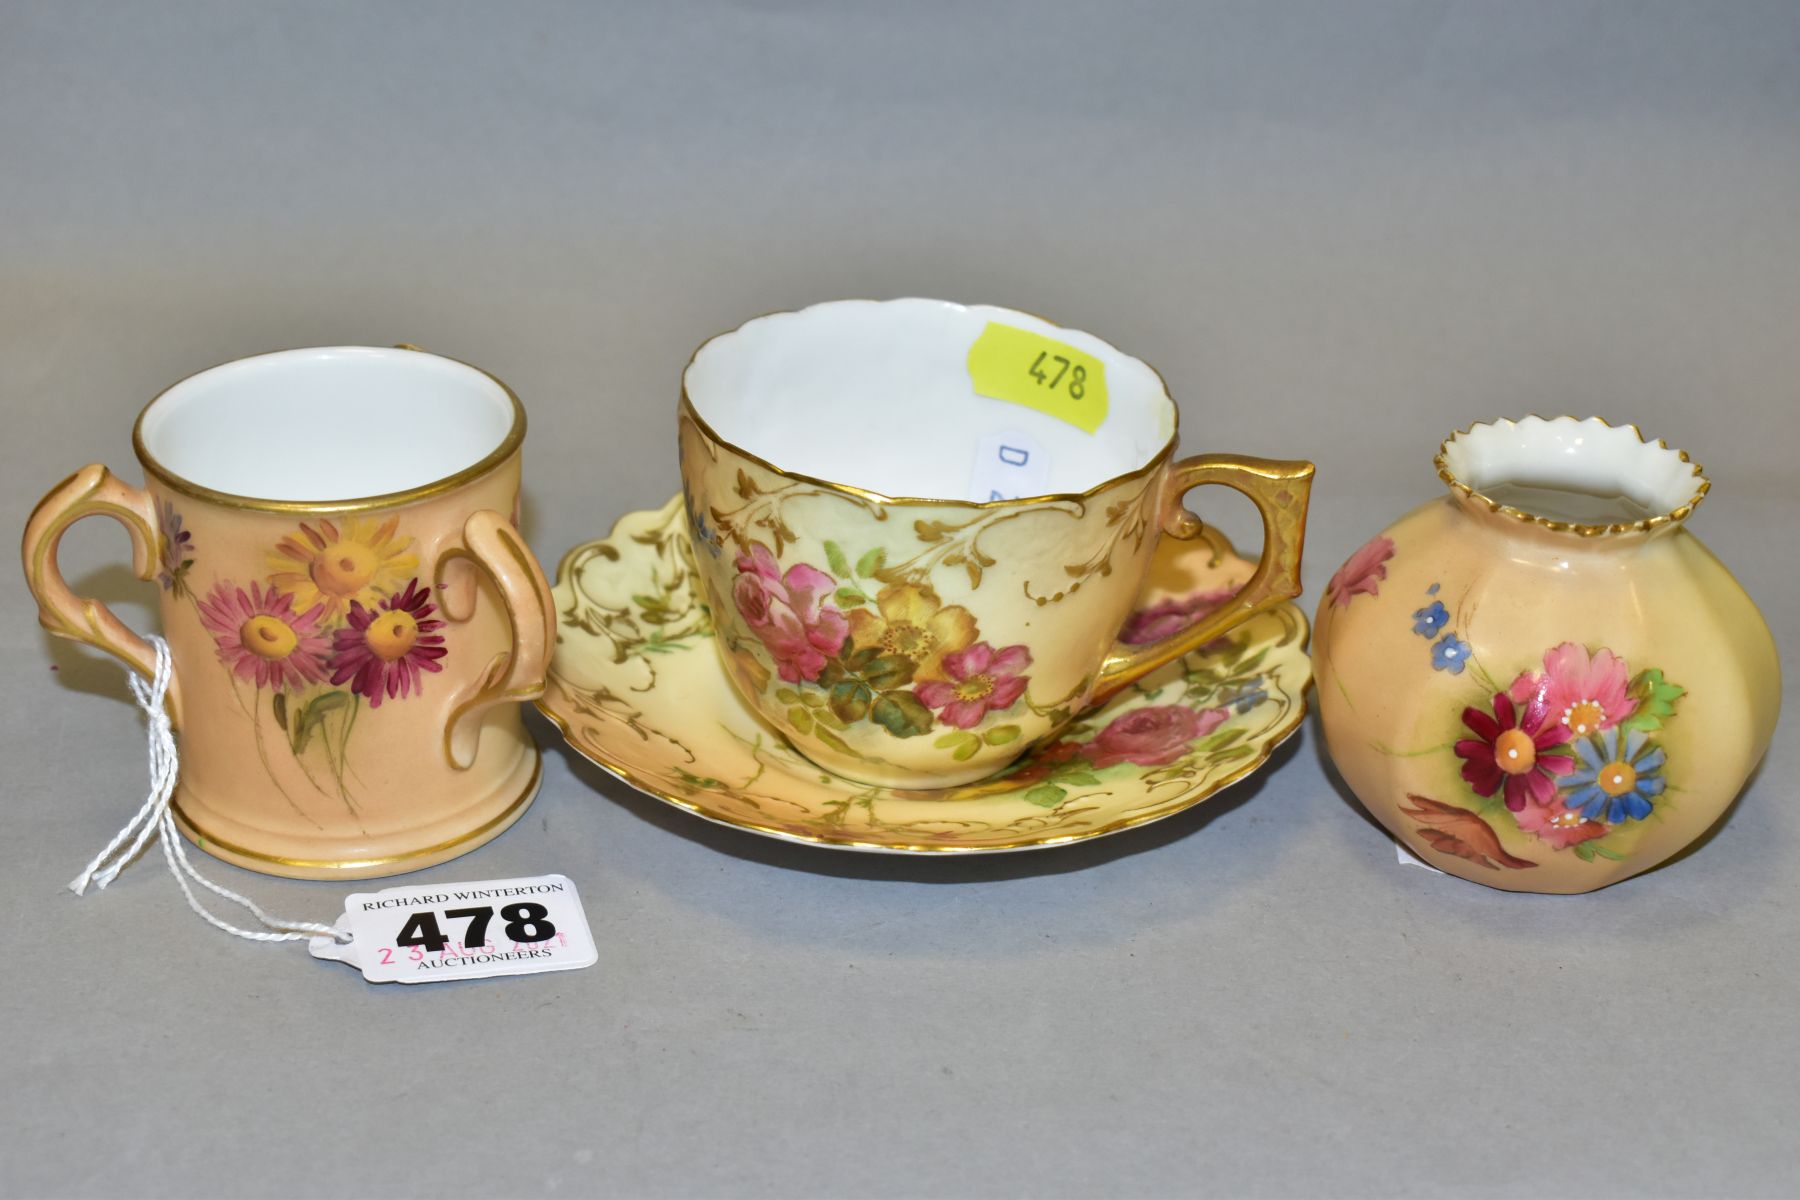 A ROYAL WORCESTER BLUSH IVORY MATCHED COFFEE CUP AND SAUCER AND TWO OTHER SIMILAR ITEMS, the cup and